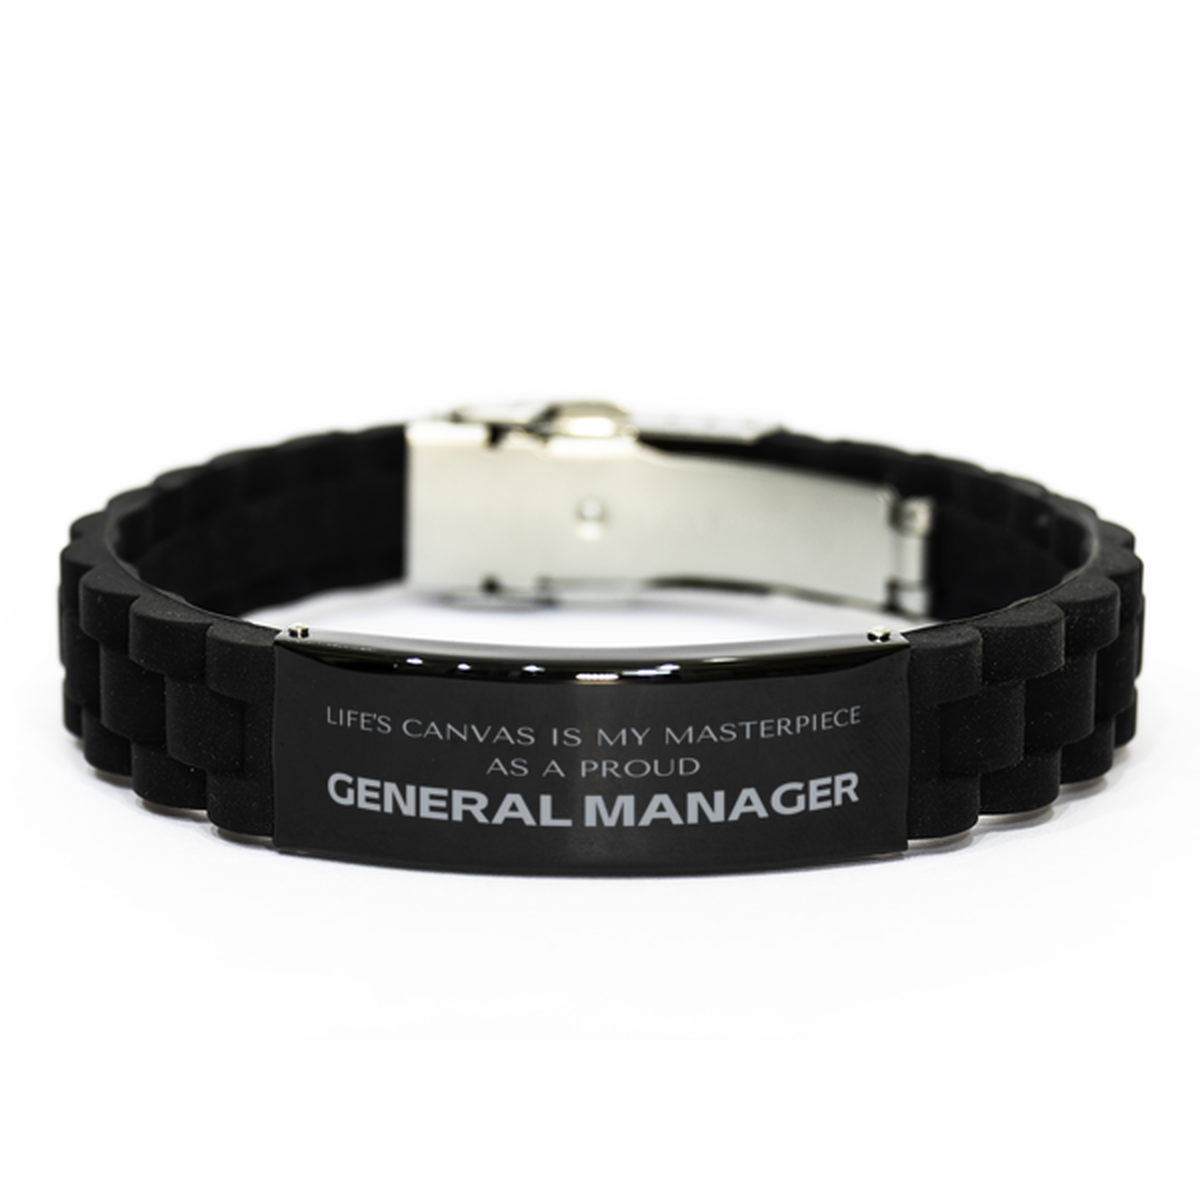 Proud General Manager Gifts, Life's canvas is my masterpiece, Epic Birthday Christmas Unique Black Glidelock Clasp Bracelet For General Manager, Coworkers, Men, Women, Friends